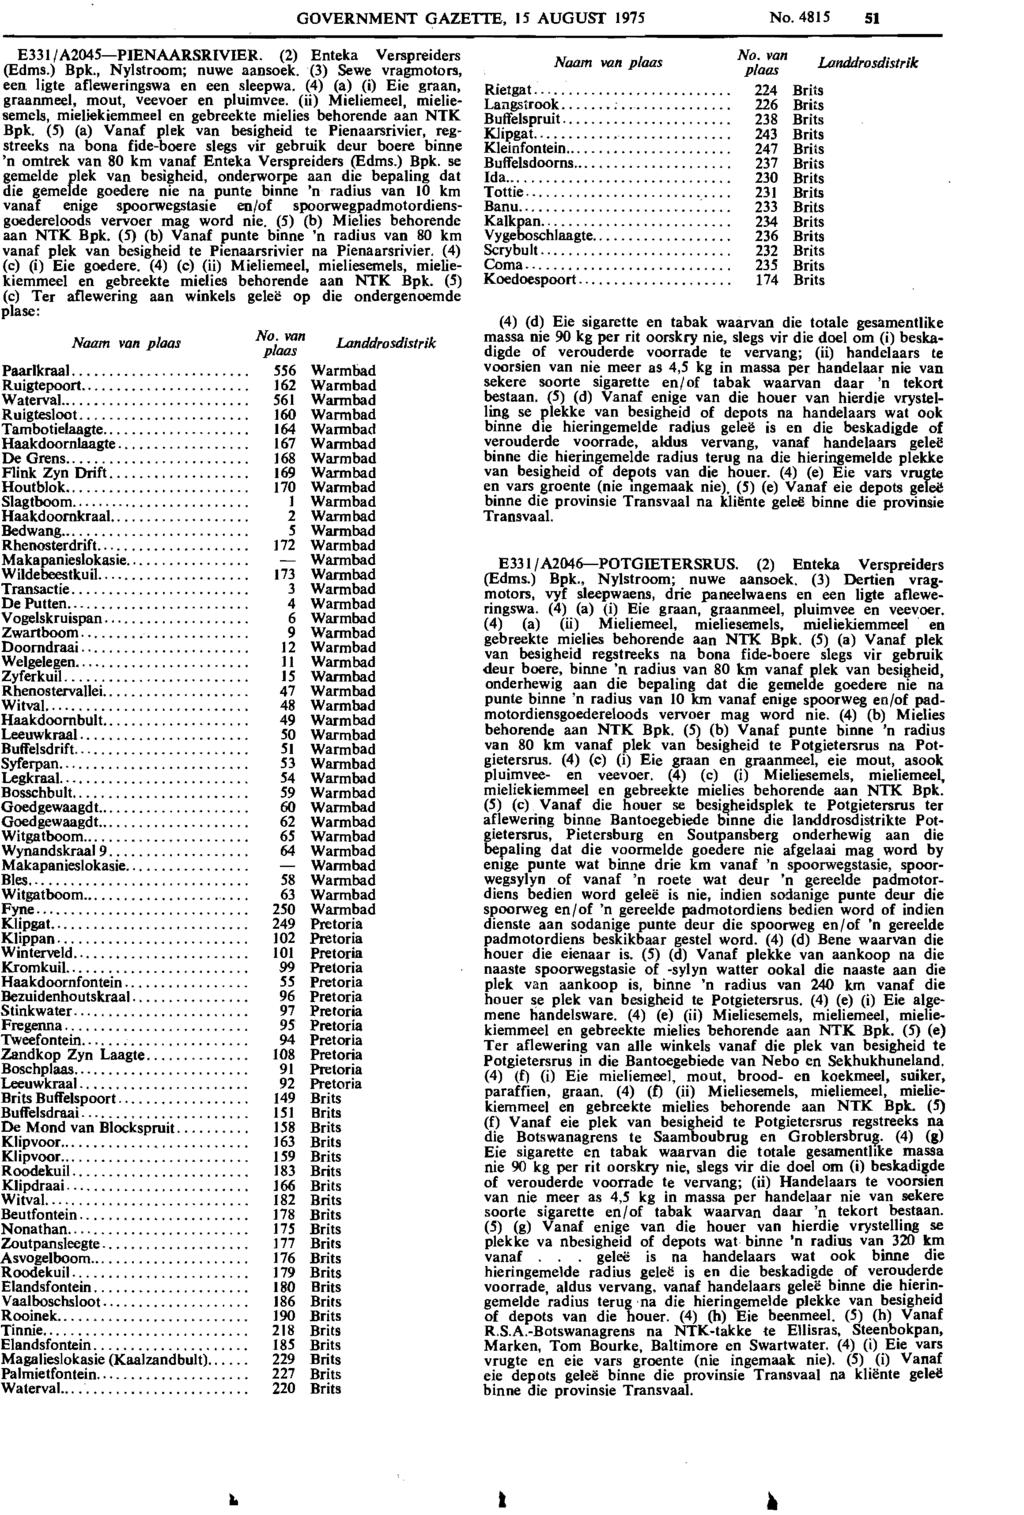 1 Reproduced by Sabinet Online in terms of Government Printer s Copyright Authority No. 10505 dated 02 February 1998 GOVERNMENT GAZETTE, 15 AUGUST 1975 No. 4815 51 E331/A2045-PIENAARSRIVIER.